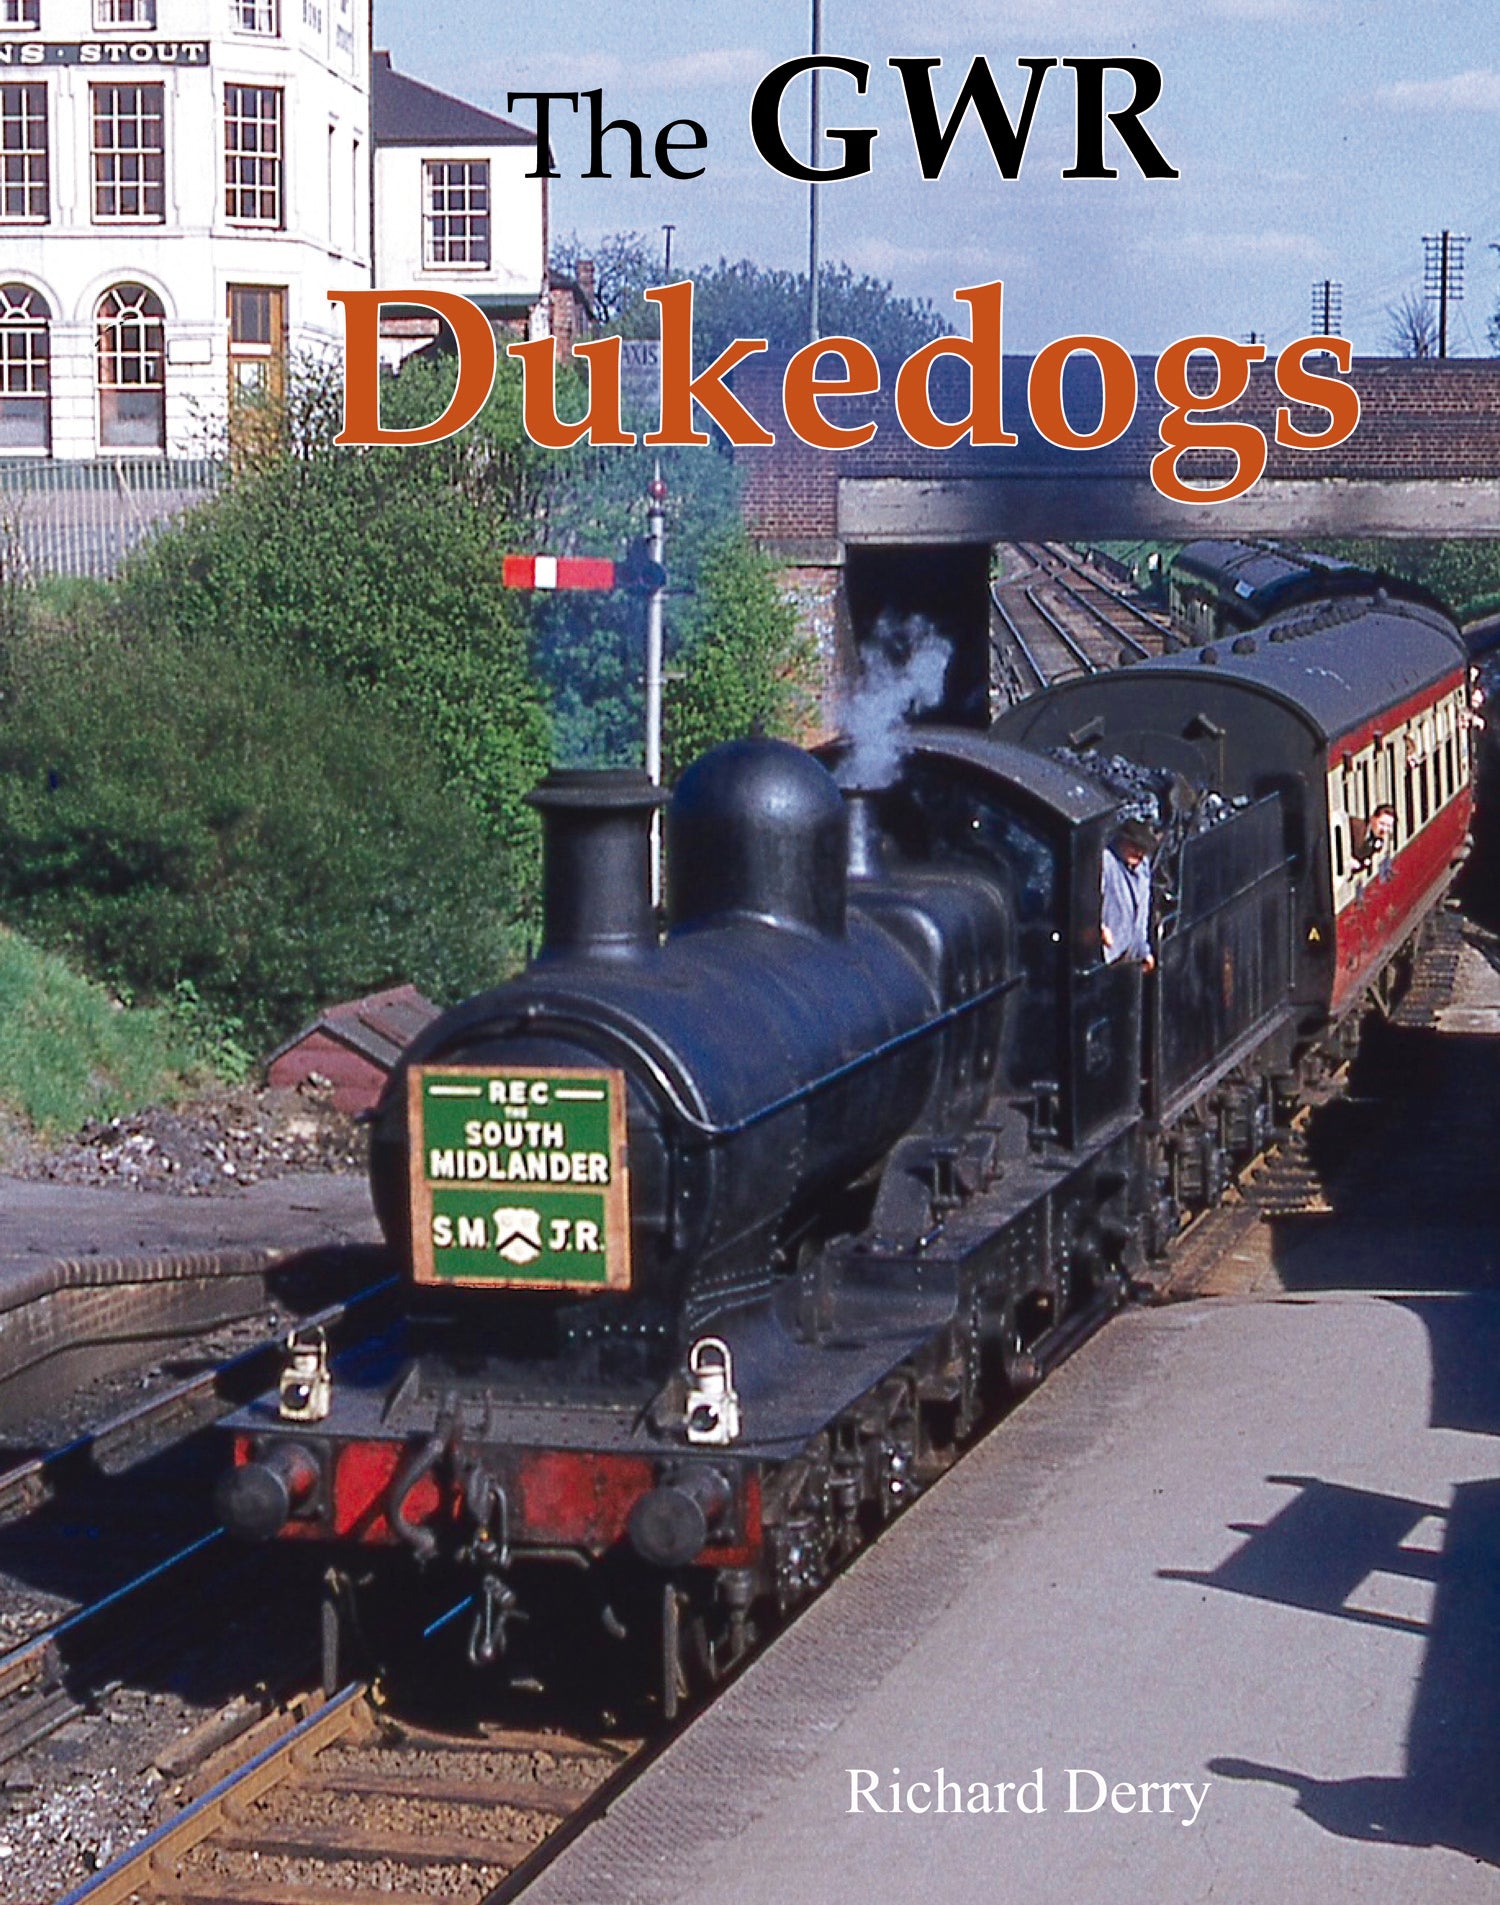 The GWR Dukedogs